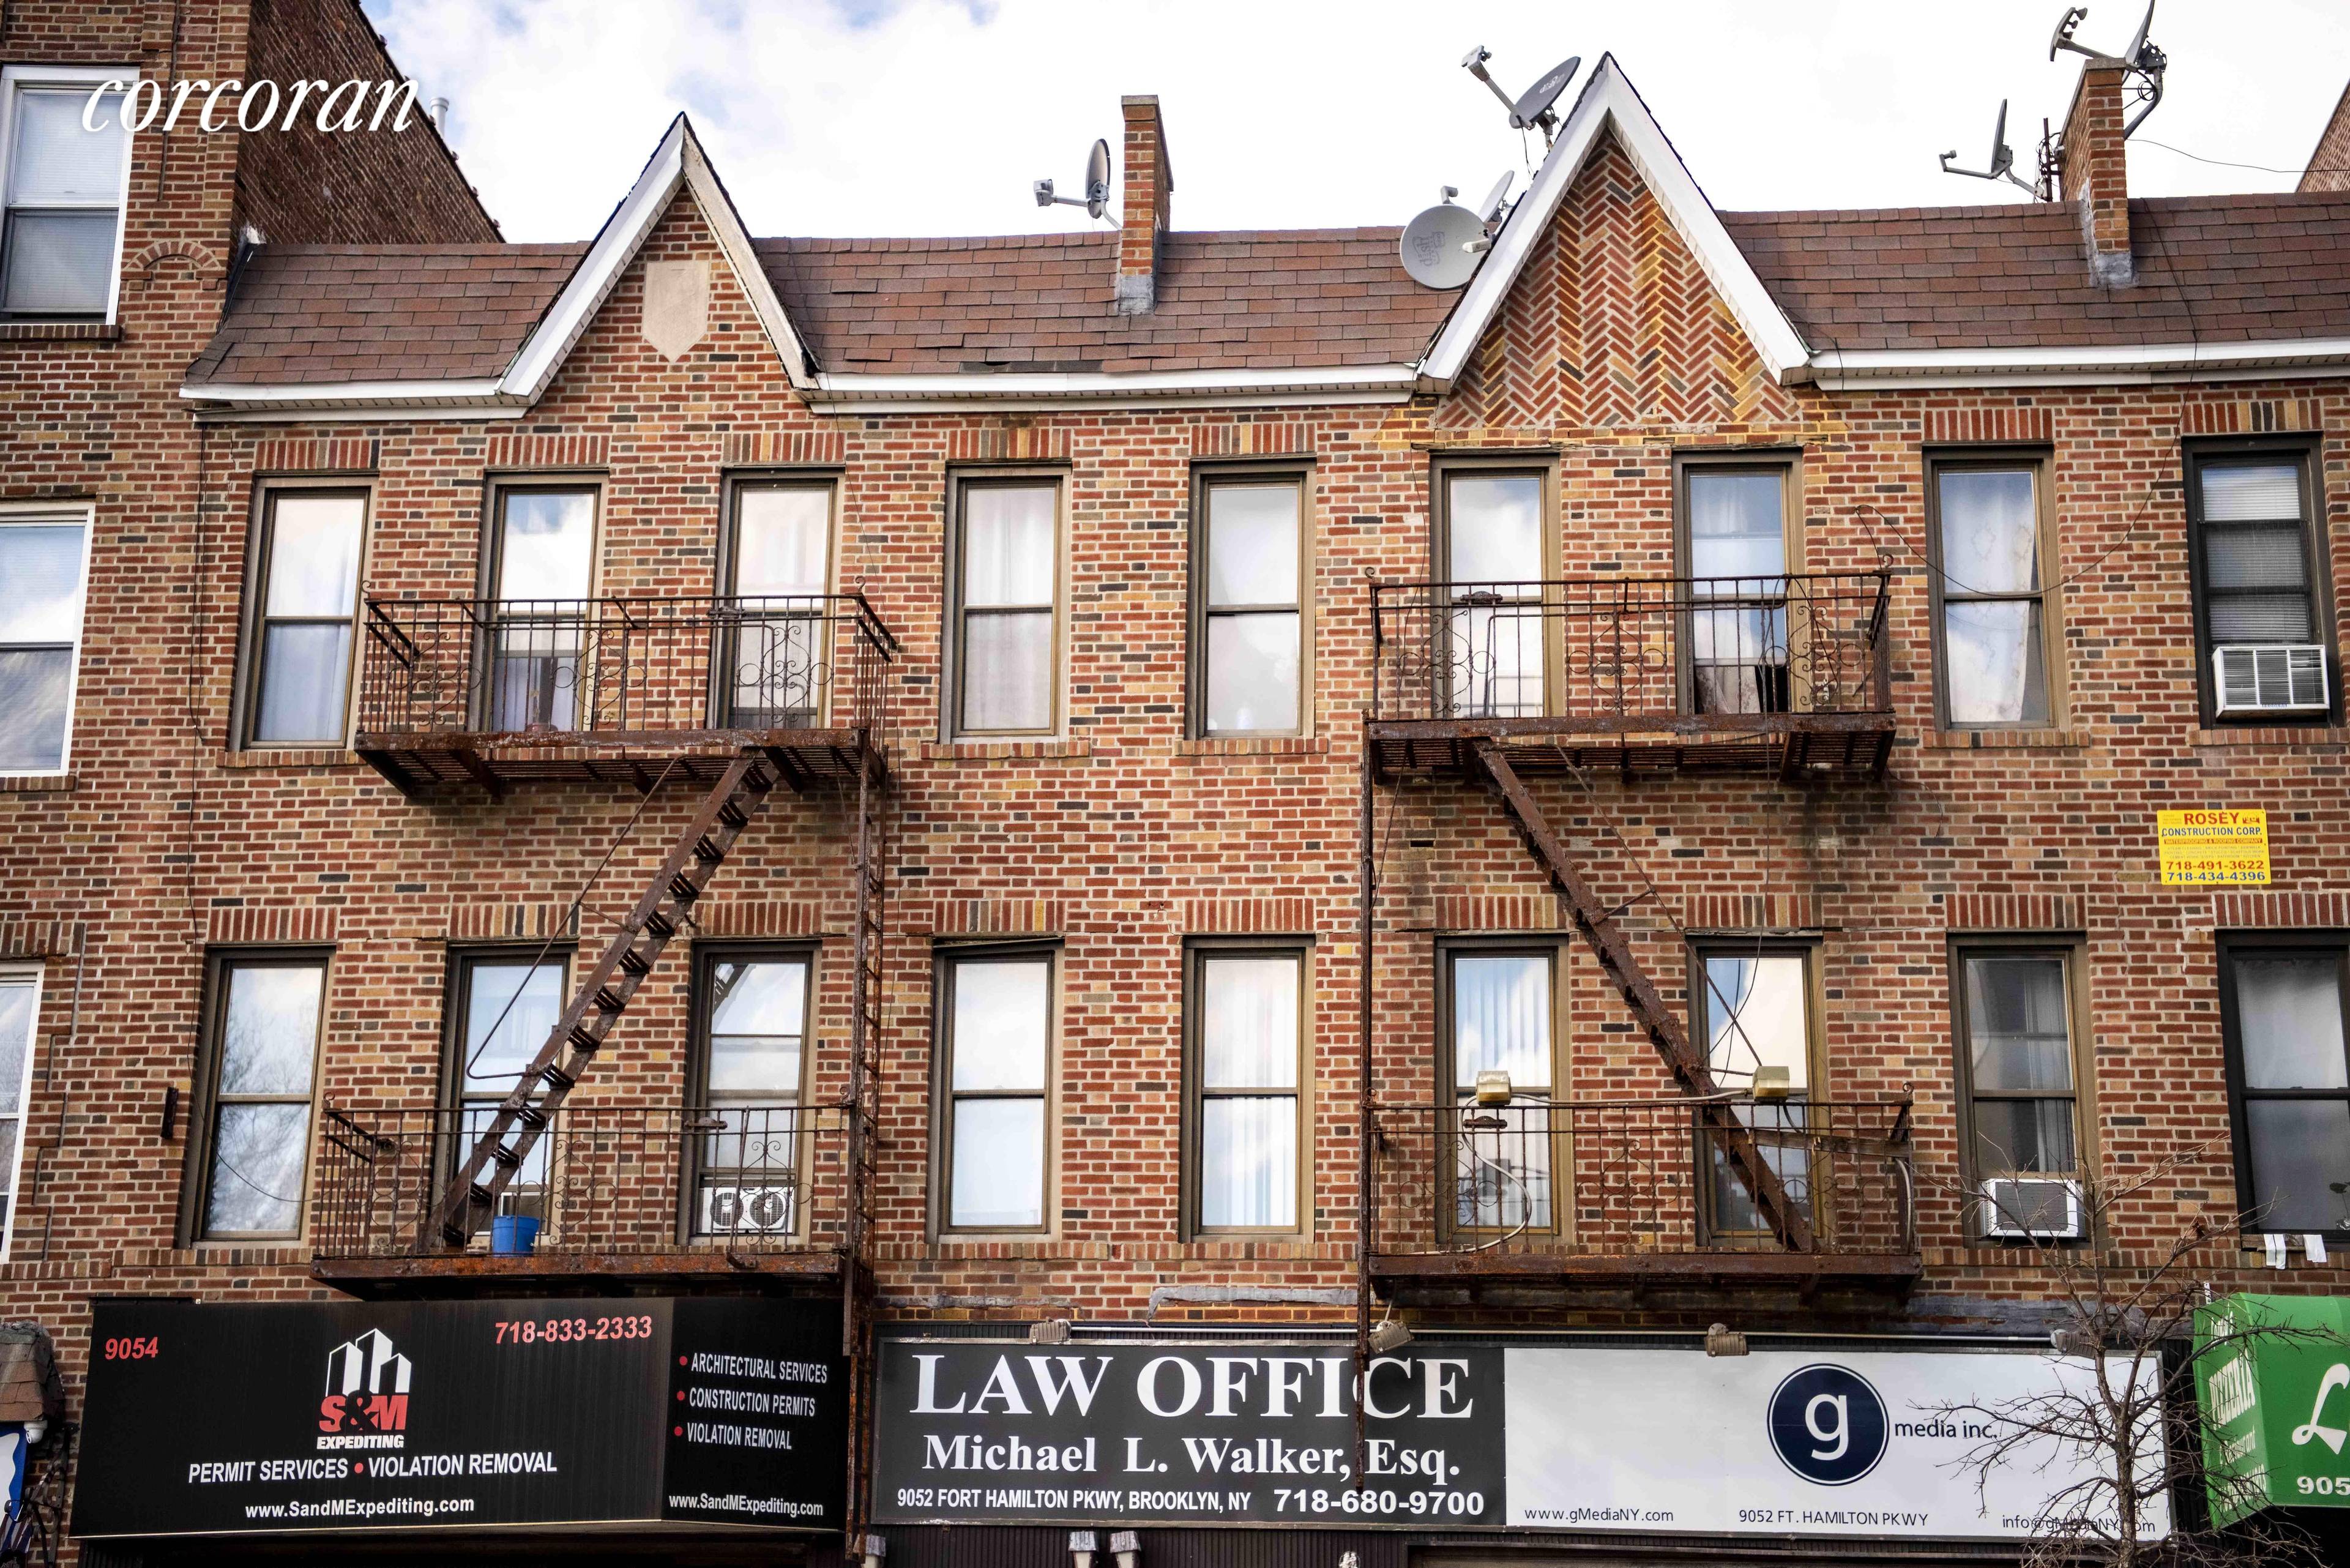 Your chance to own two adjacent buildings in Prime Bay Ridge on Fort Hamilton Parkway !